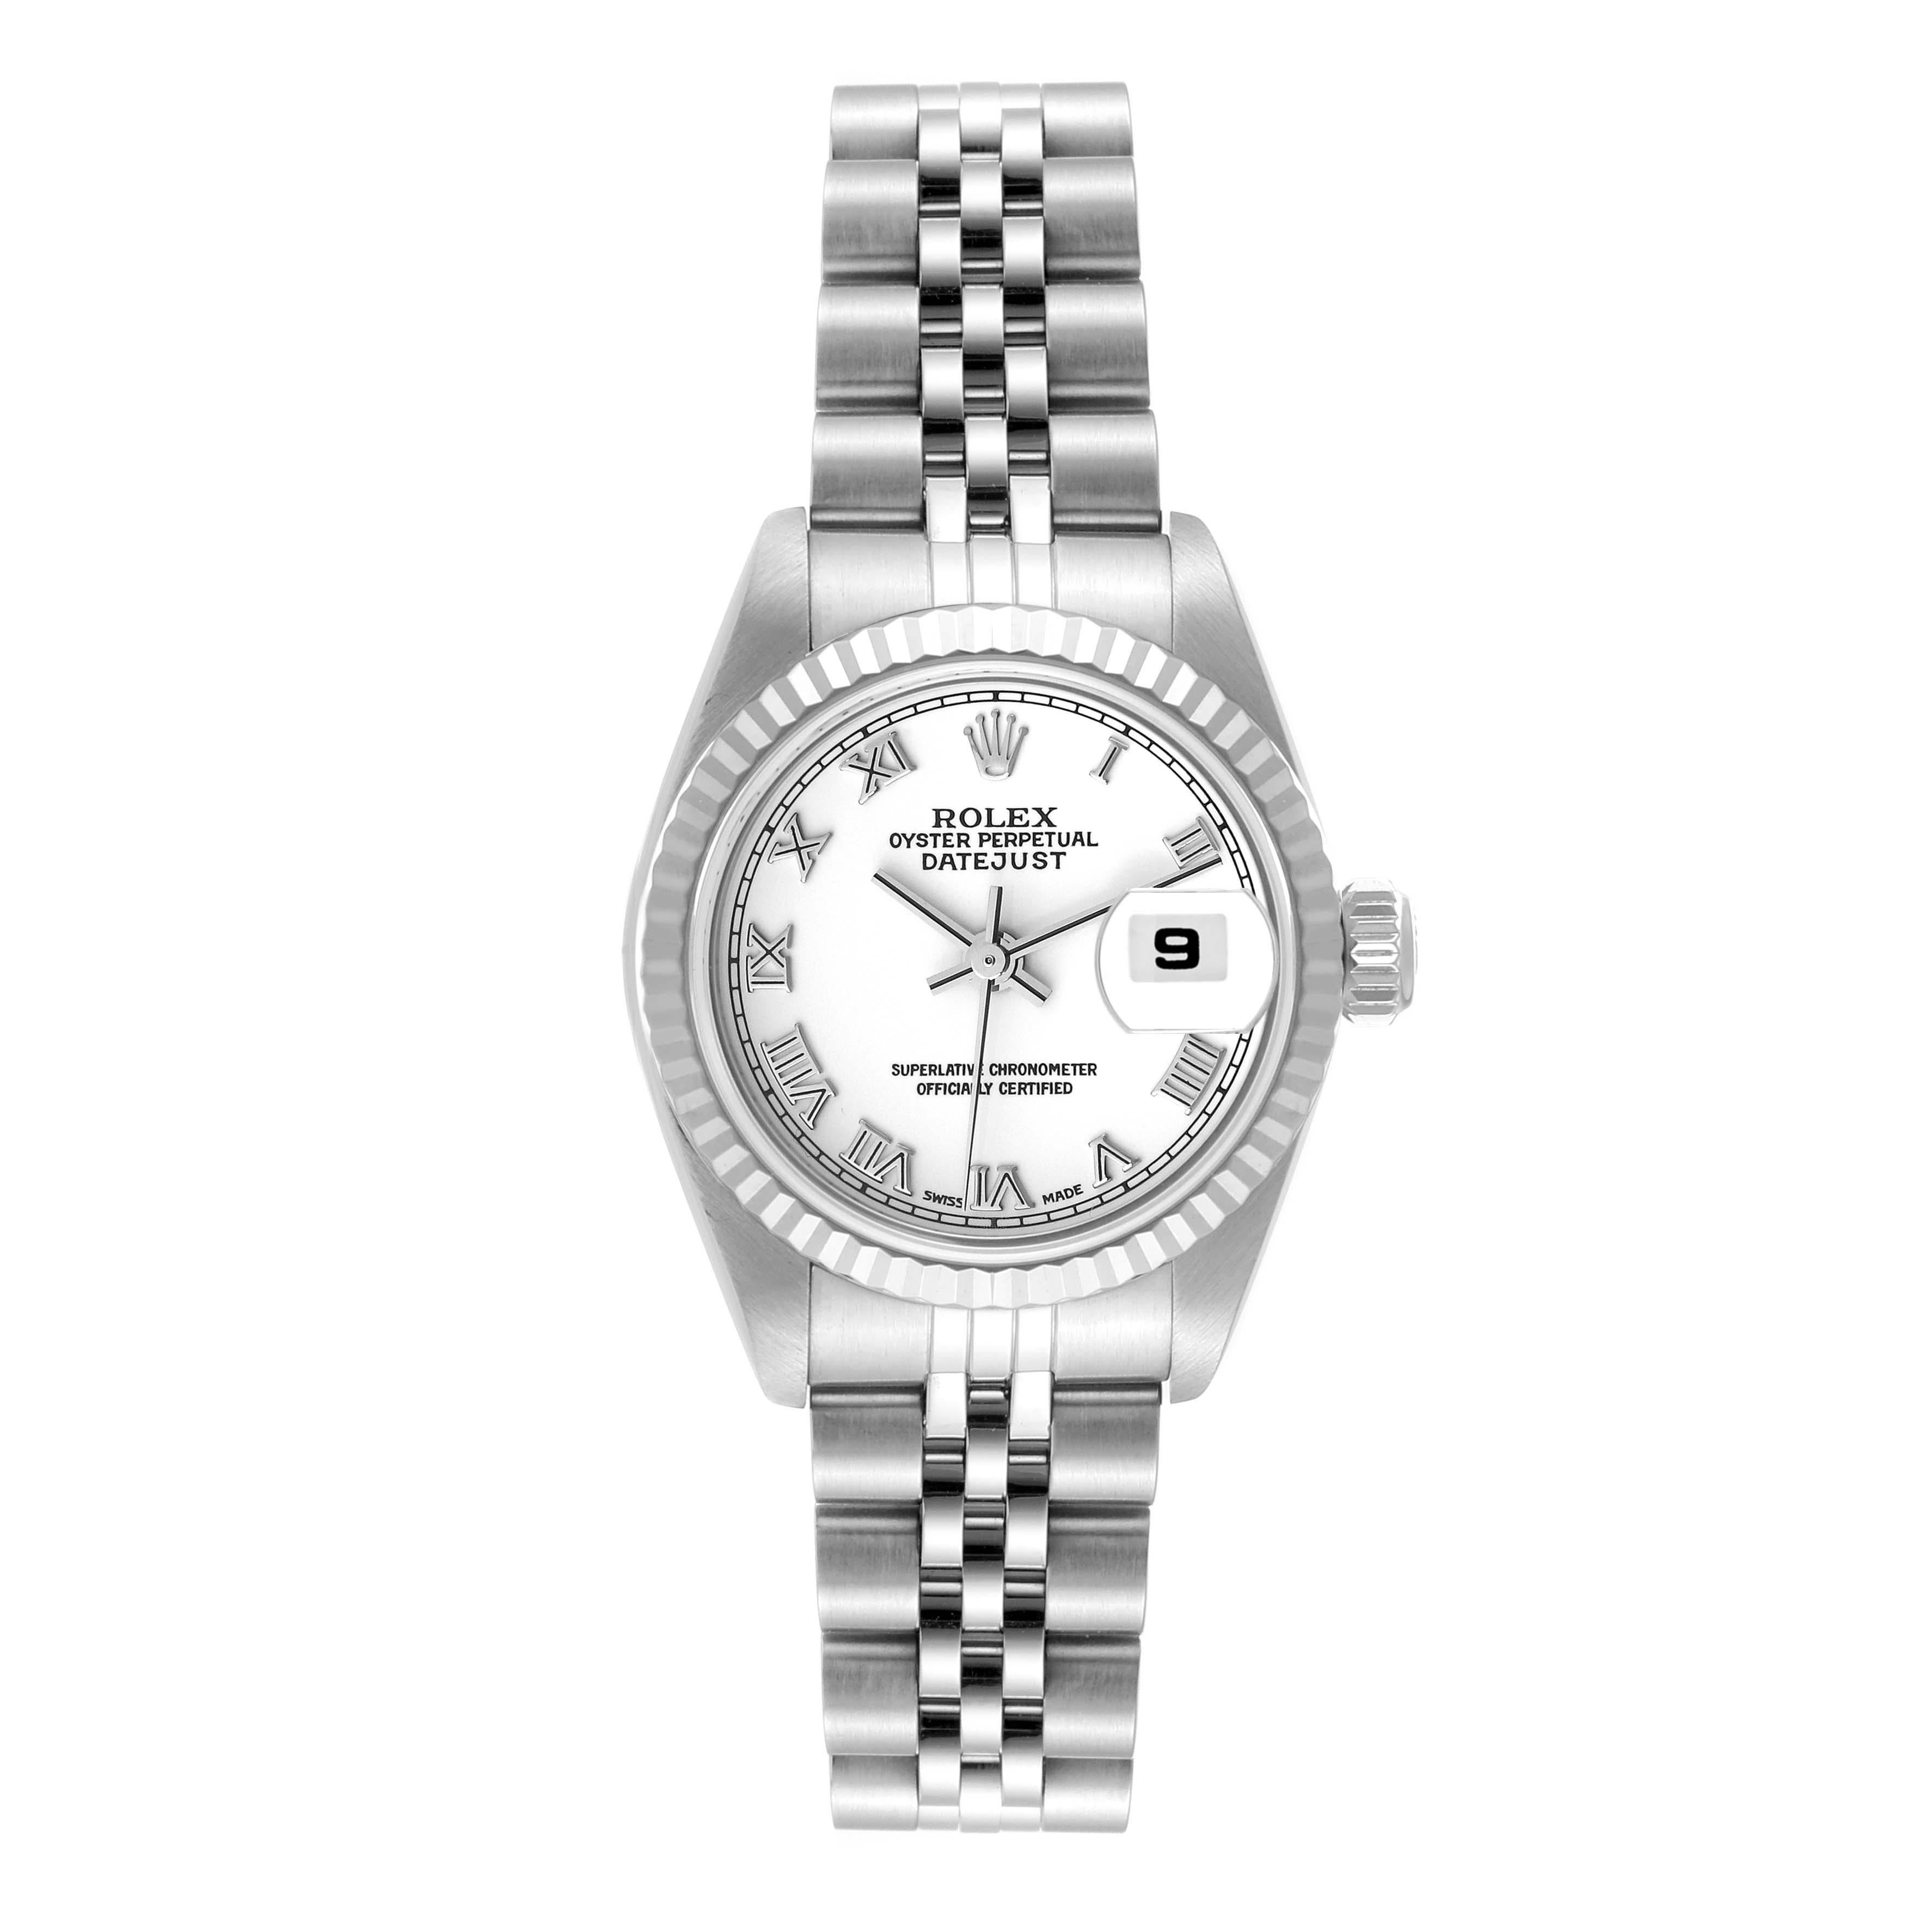 Rolex Datejust Steel White Gold Ladies Watch 79174 Papers. Officially certified chronometer automatic self-winding movement. Stainless steel oyster case 26.0 mm in diameter. Rolex logo on a crown. 18K white gold fluted bezel. Scratch resistant